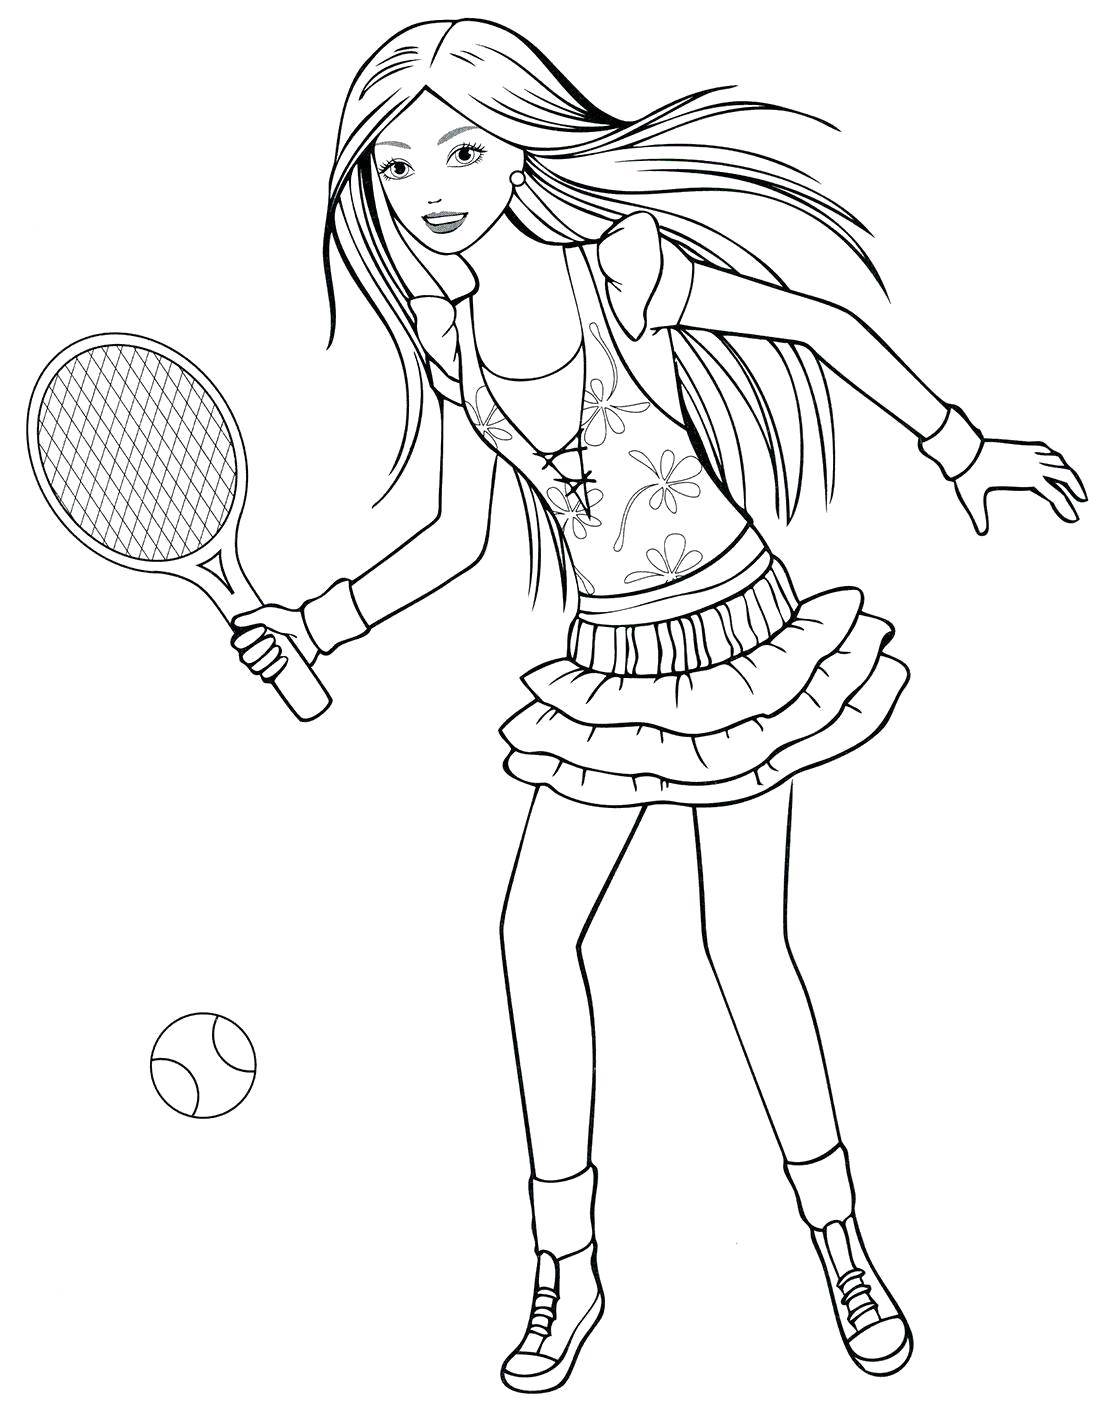 Coloring Tennis. Category sports. Tags:  Sports, tennis, racquet.